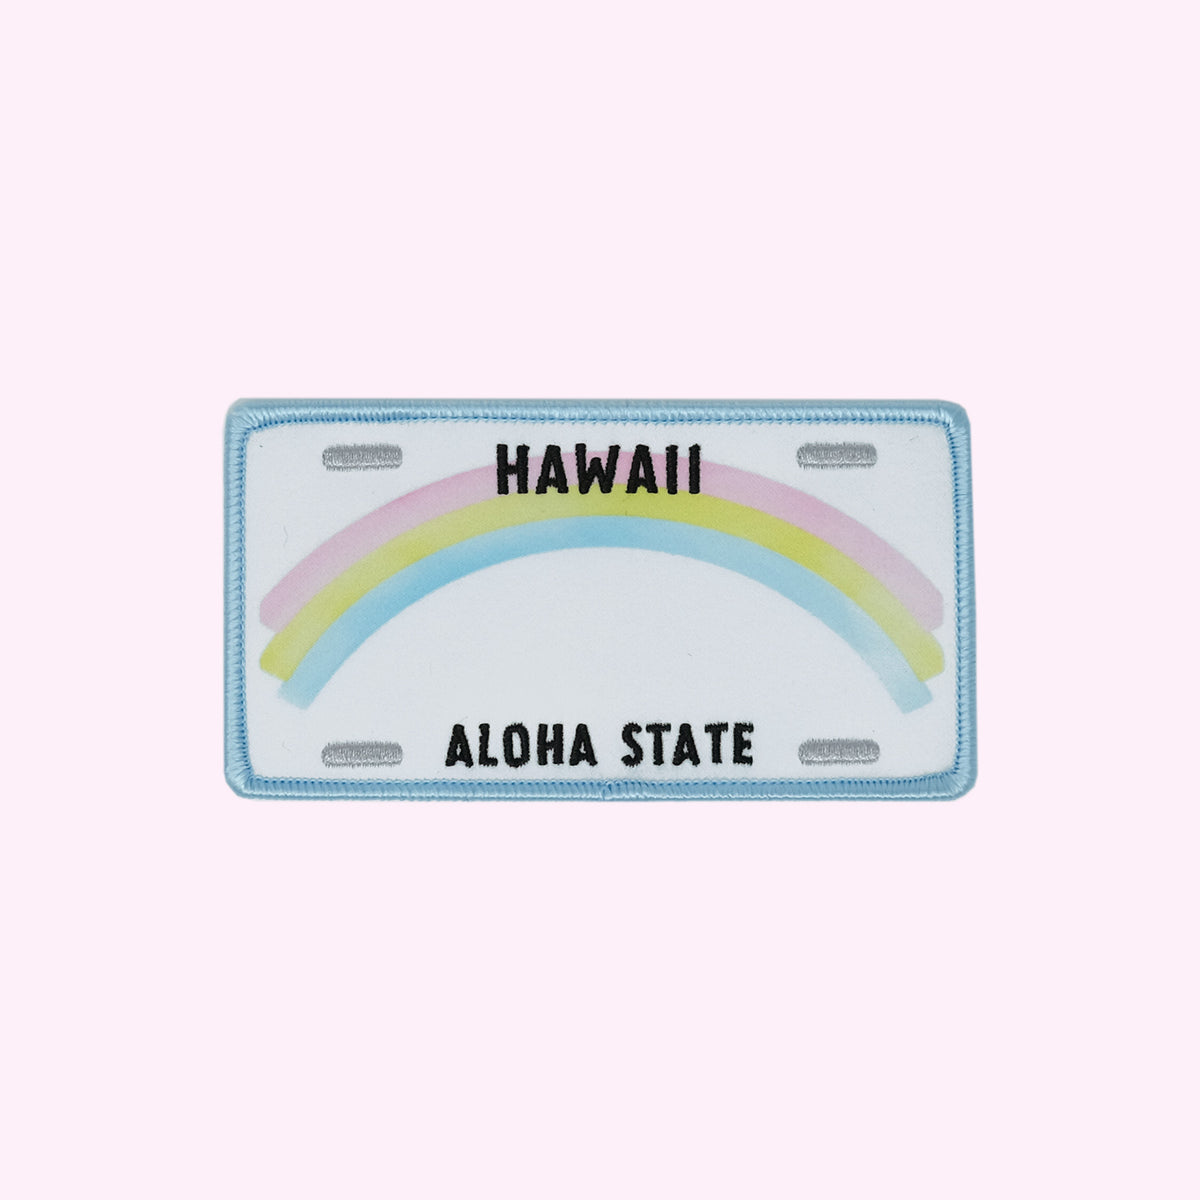 Hawaii License Plate Name Patch